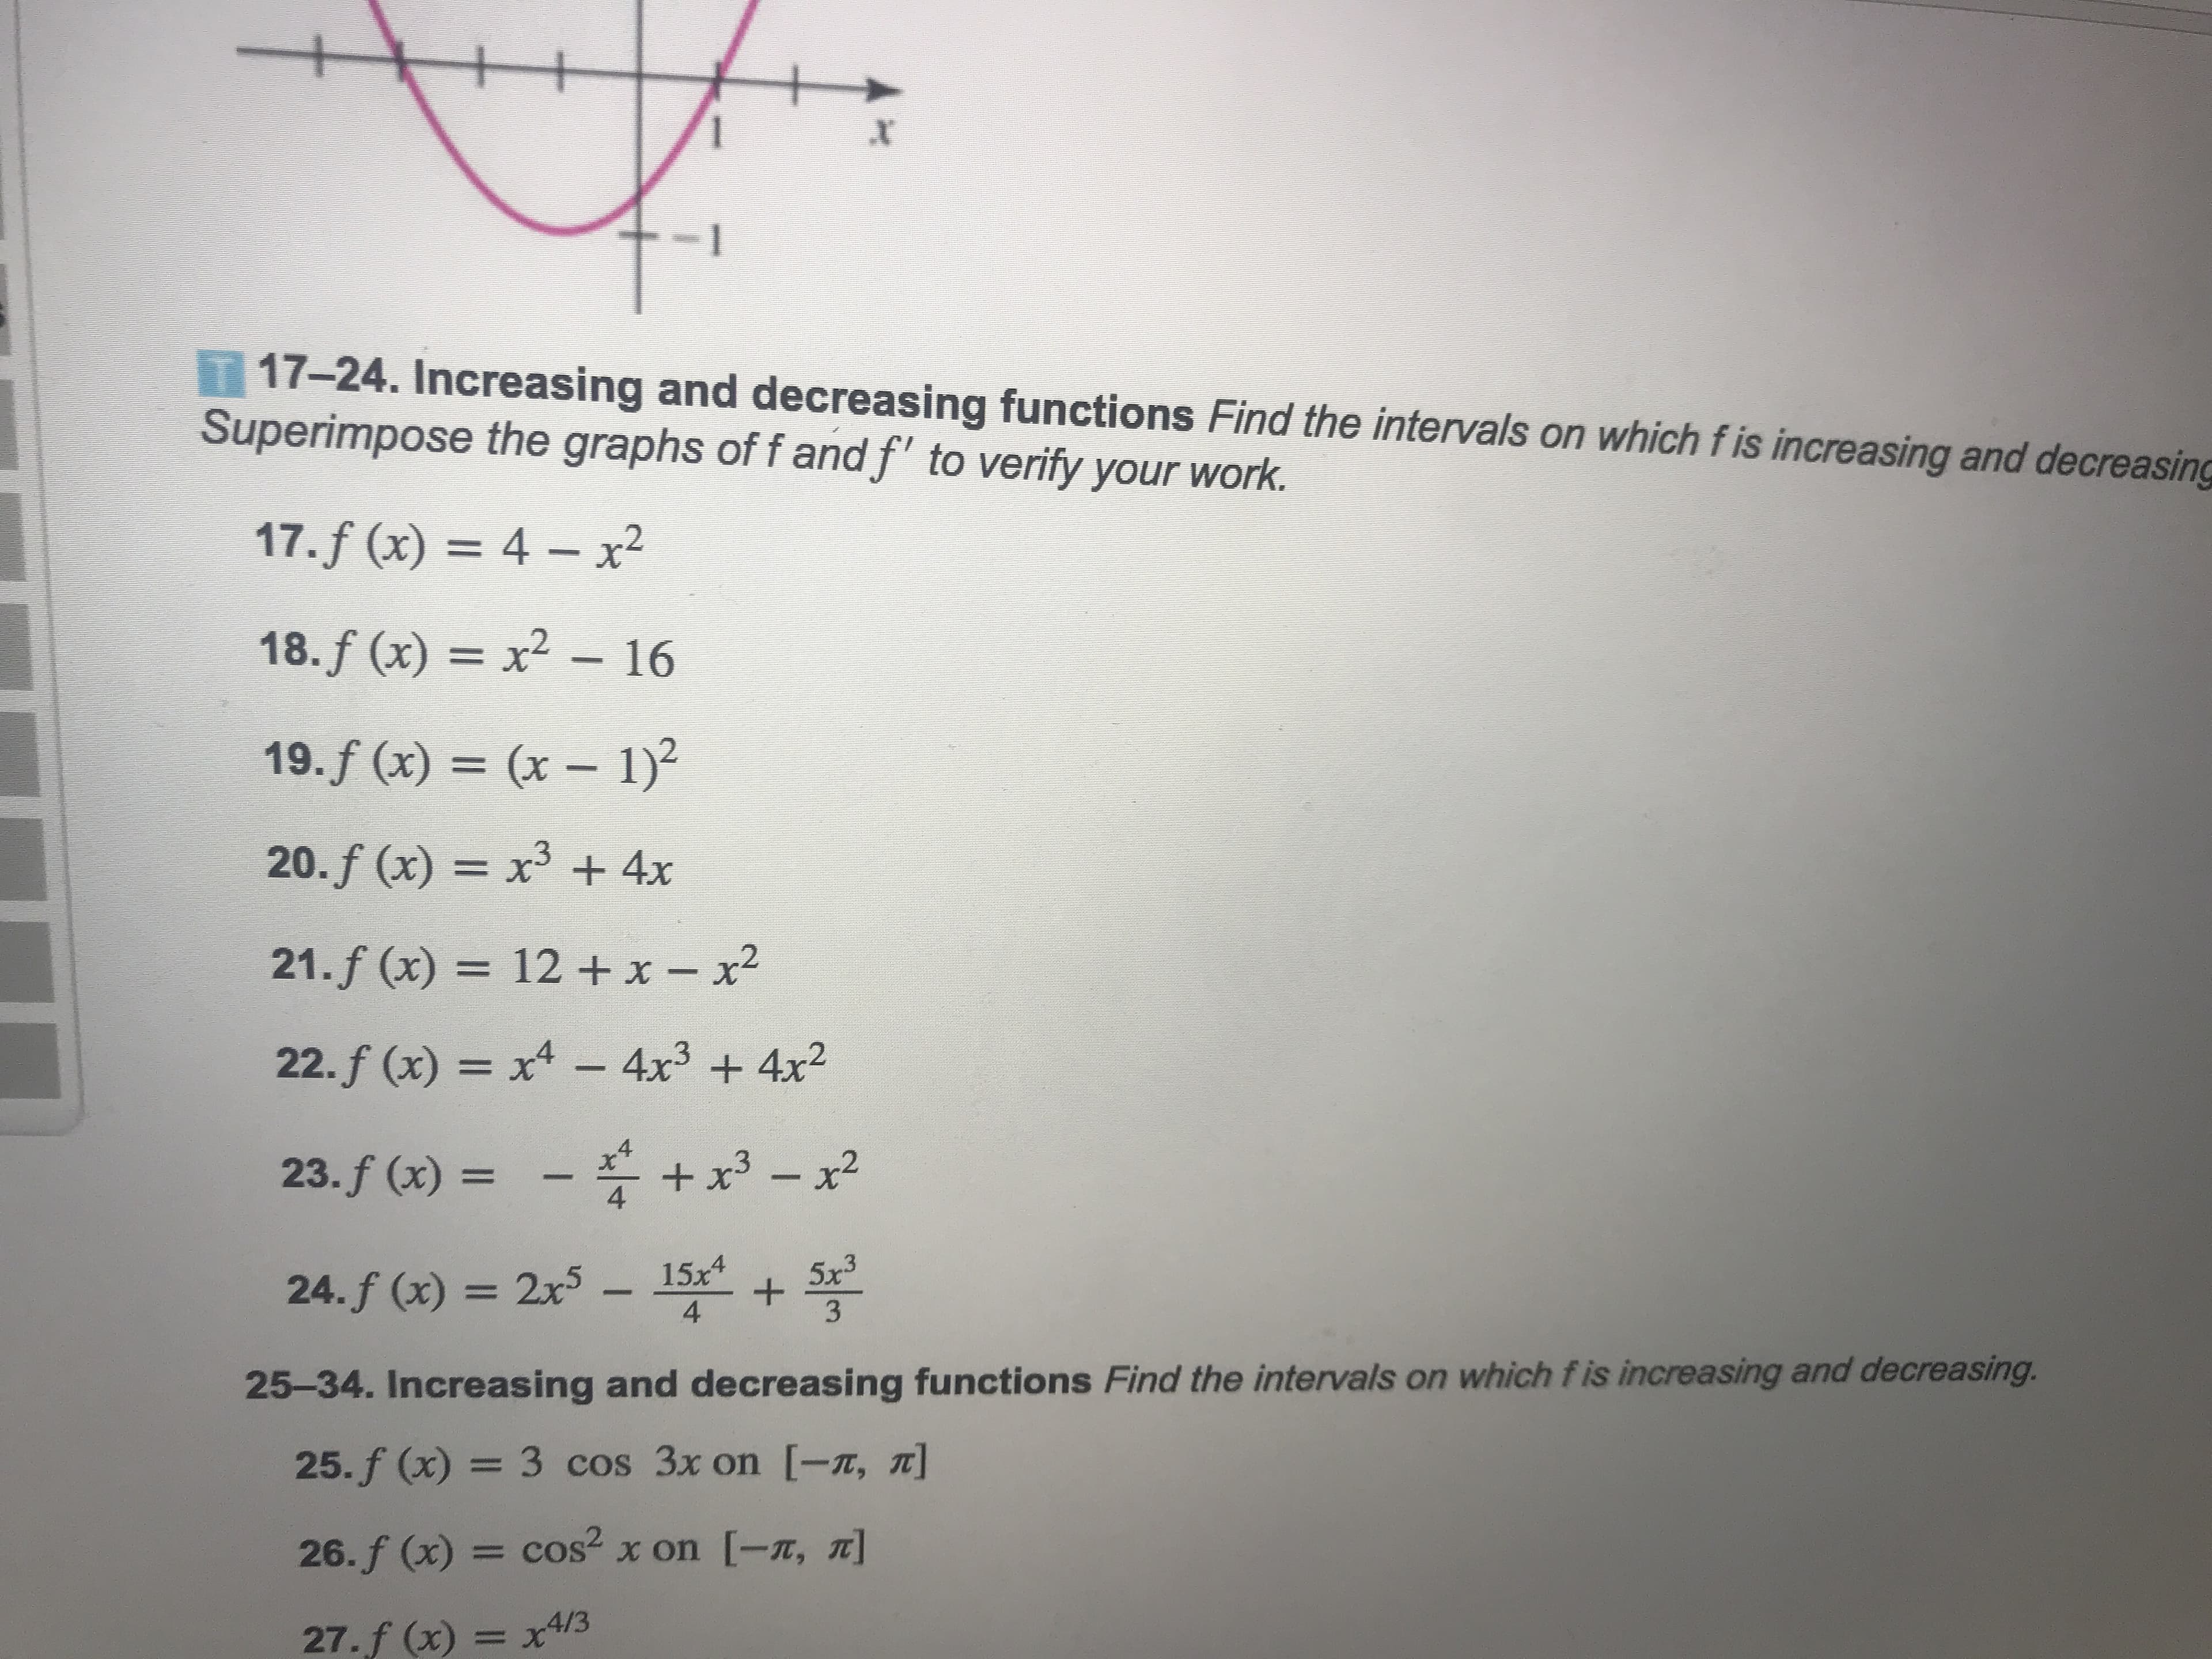 T 17-24. Increasing and decreasing functions Find the intervals on which fis increasing and decreasing
Superimpose the graphs of f and f" to verify your work.
17,f(x) = 4-x2
18,f(x) = x2-16
19.f (x)(x 1)2
20. f (x) = x3 + 4x
21.f (x) = 12 + x-x2
22,f(x) = x4-4x3 + 4x2
4
24,f(x) = 2x5 1st sa
25-34. Increasing and decreasing functions Find the intervals on which fis increasing and decreasing.
3
25,f(x) = 3 cos 3x on [-π, π]
26. f (x)= cos2 x on [-π, π]
